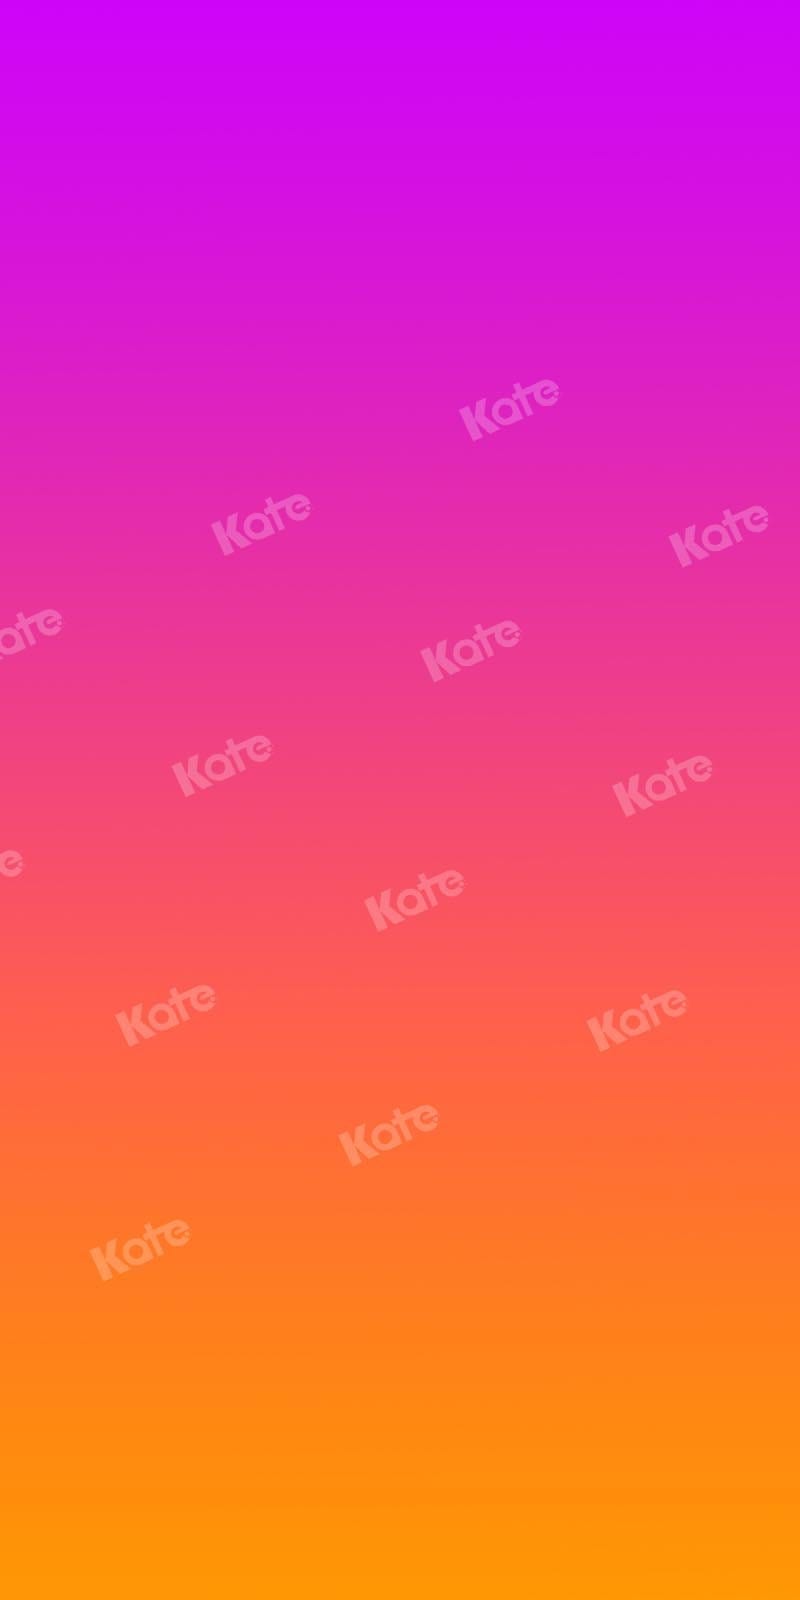 Kate Abstract Purple Gradient Orange Backdrop Designed by Kate Image